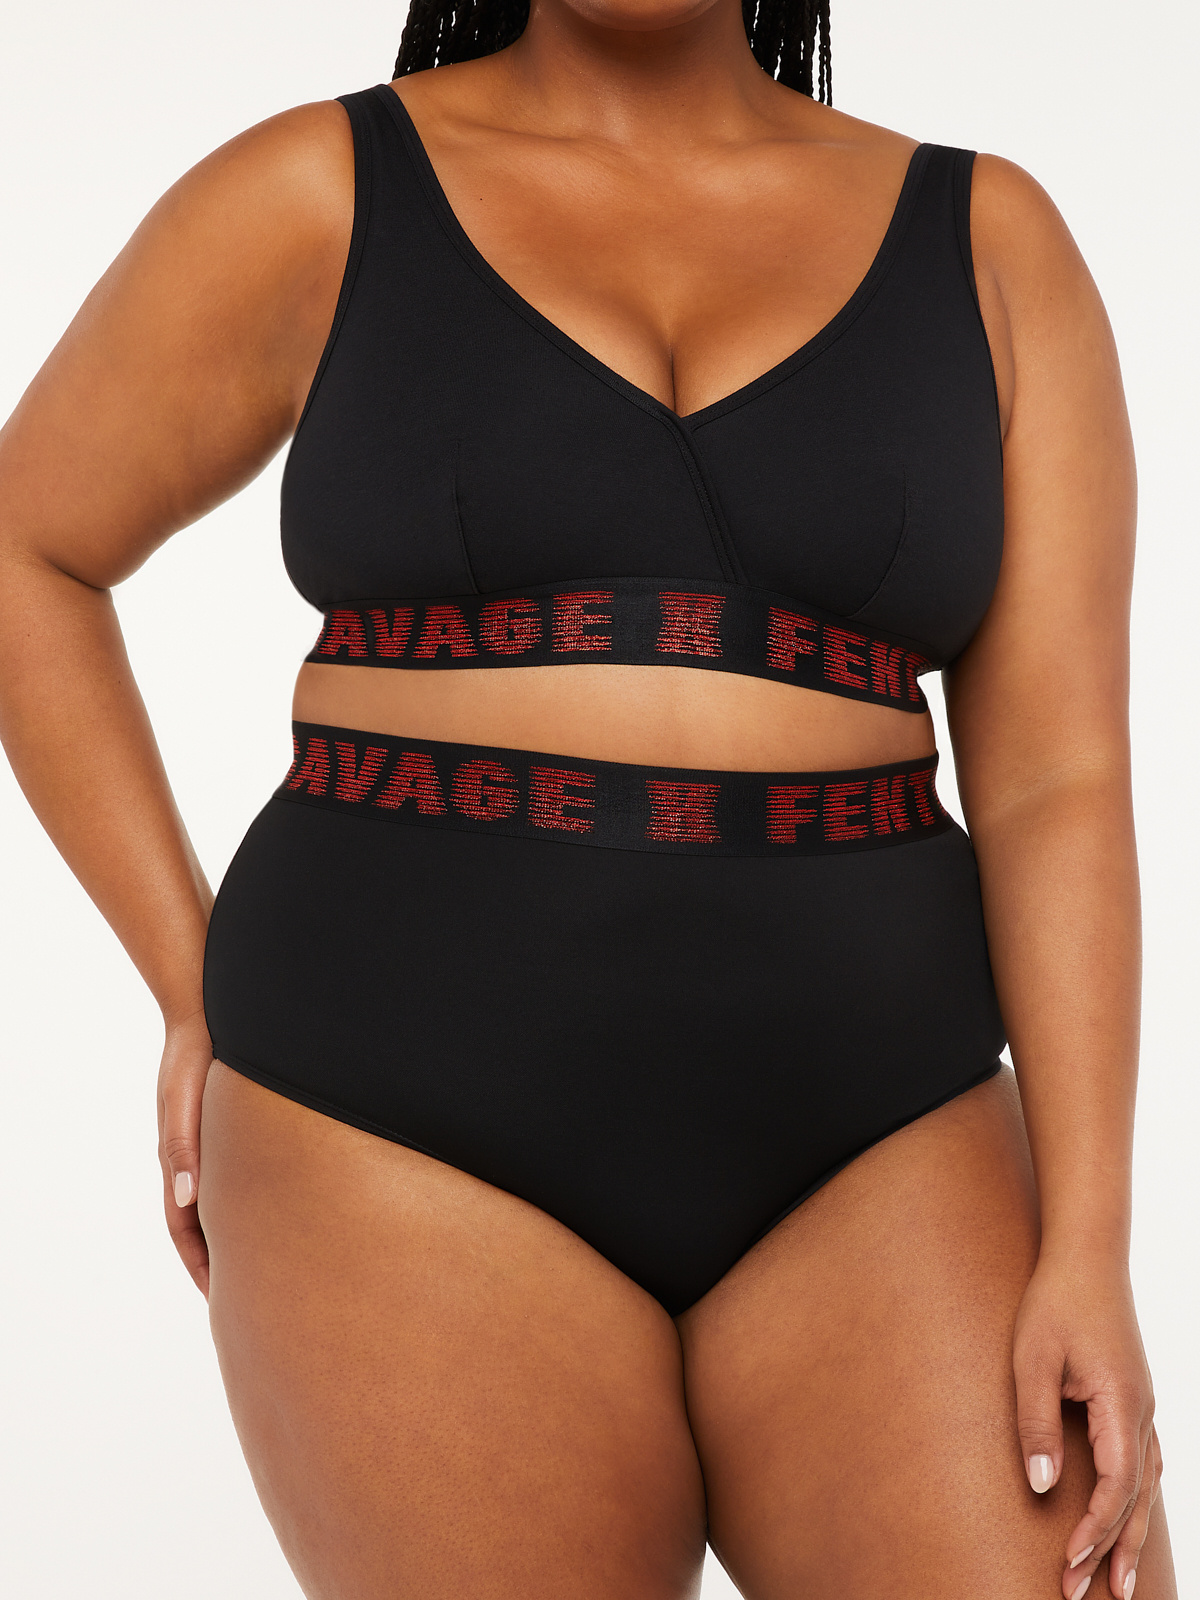 Forever Savage Booty Short in Black | SAVAGE X FENTY